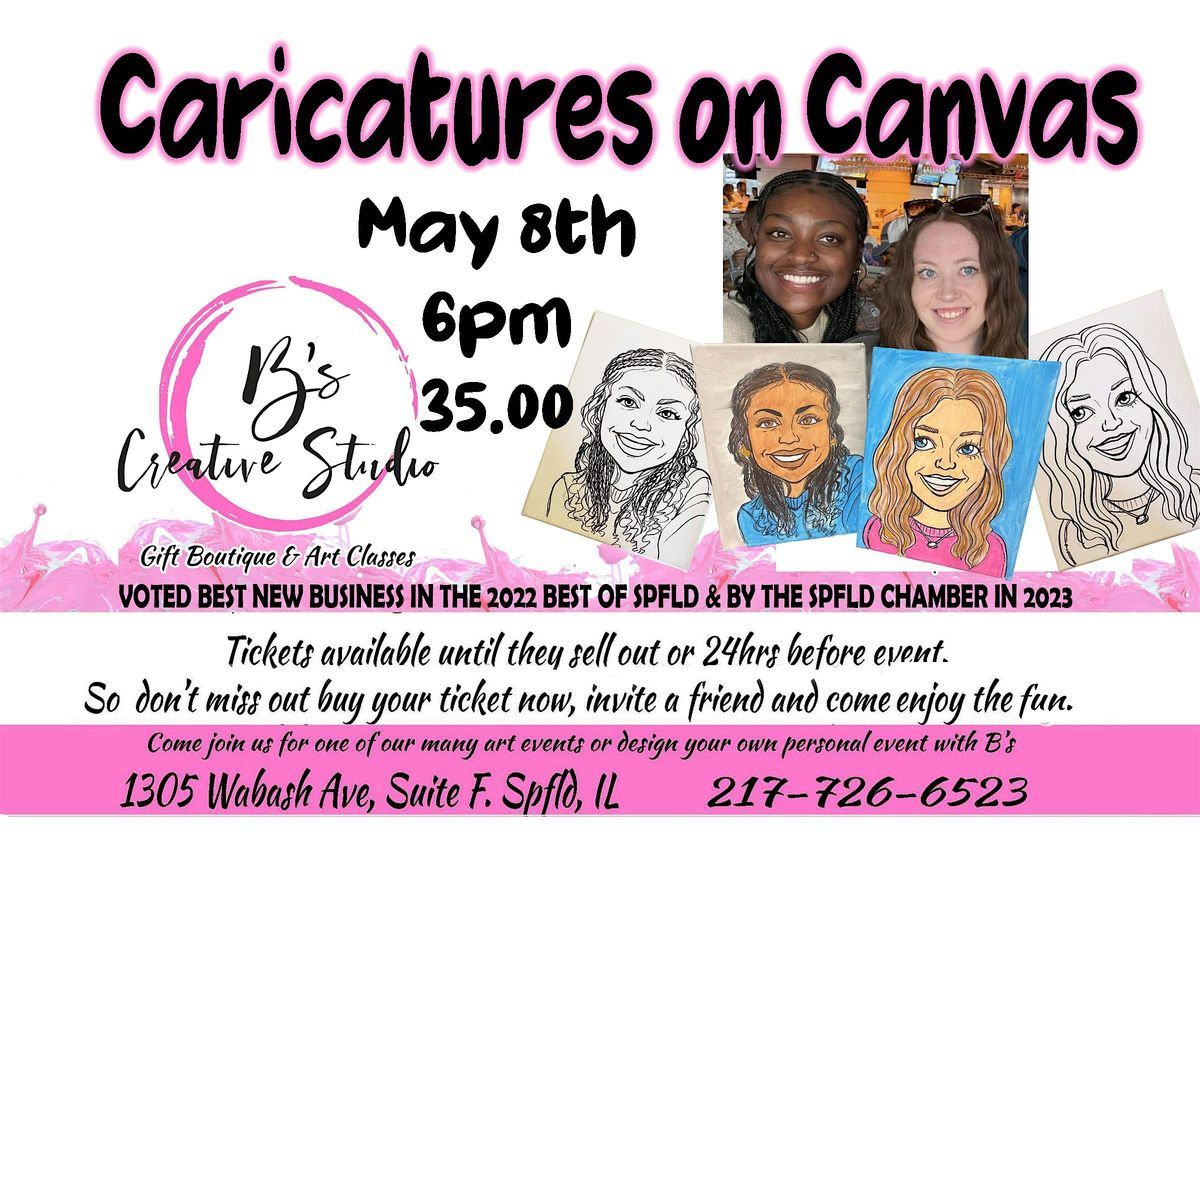 Caricatures on Canvas